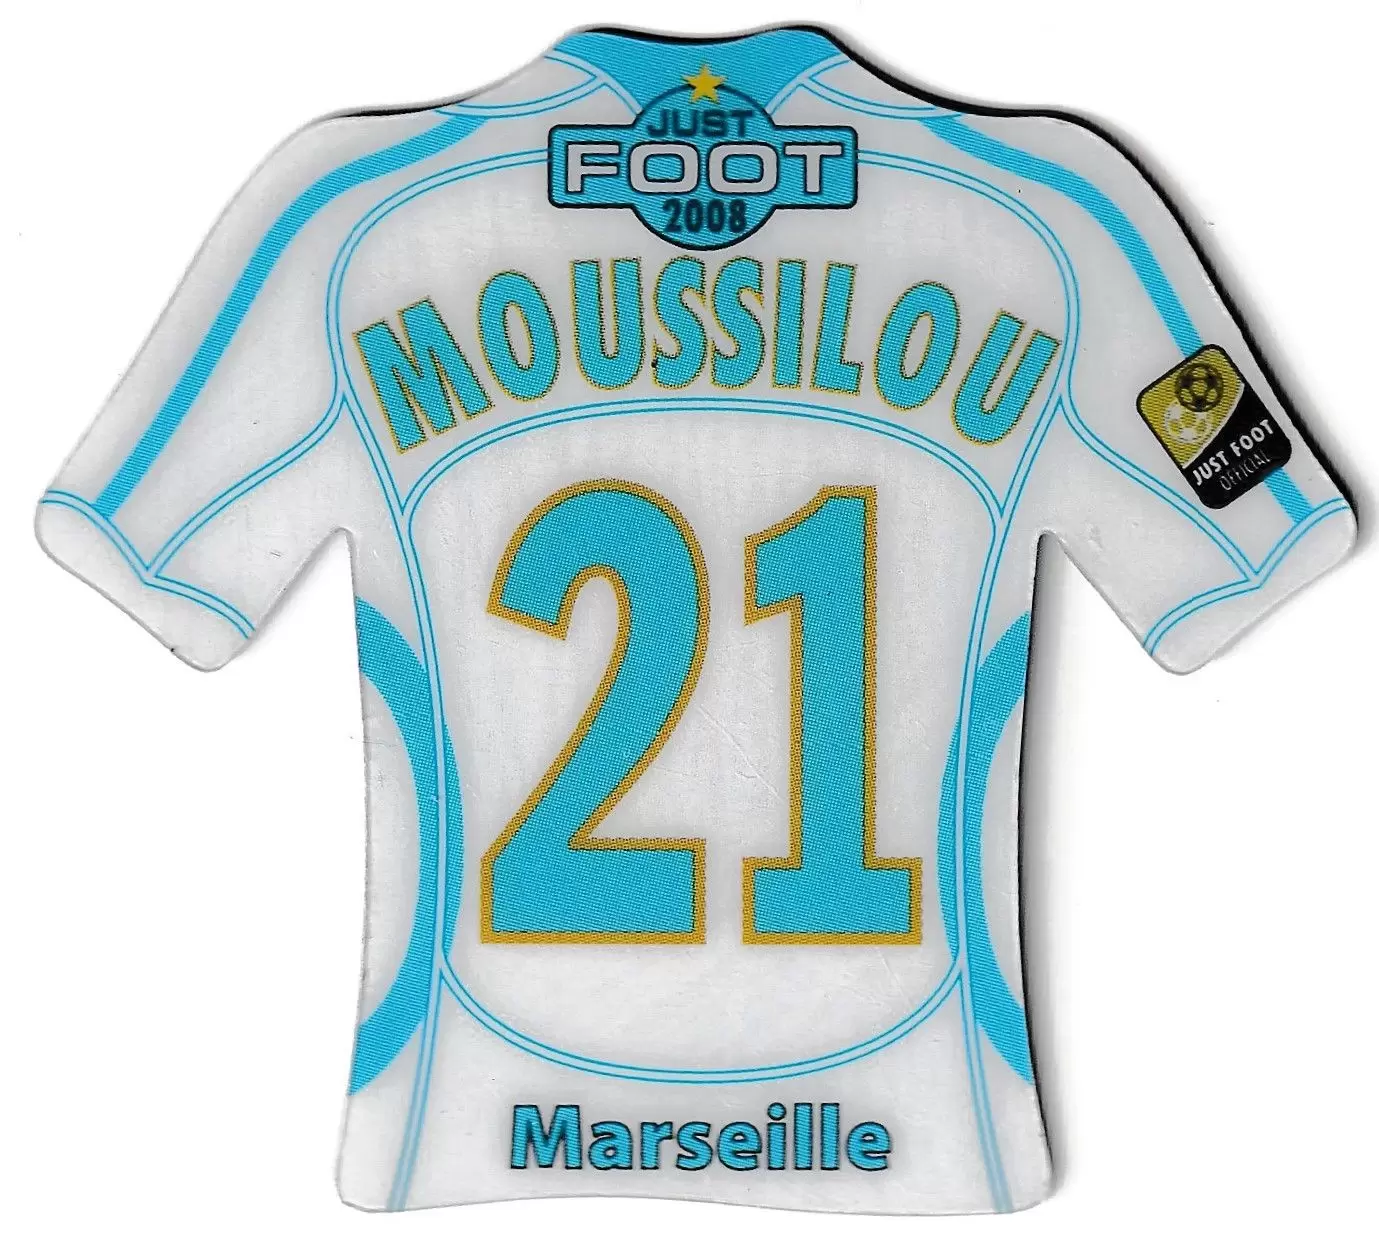 Just Foot 2008 - Marseille 21 - Moussilou